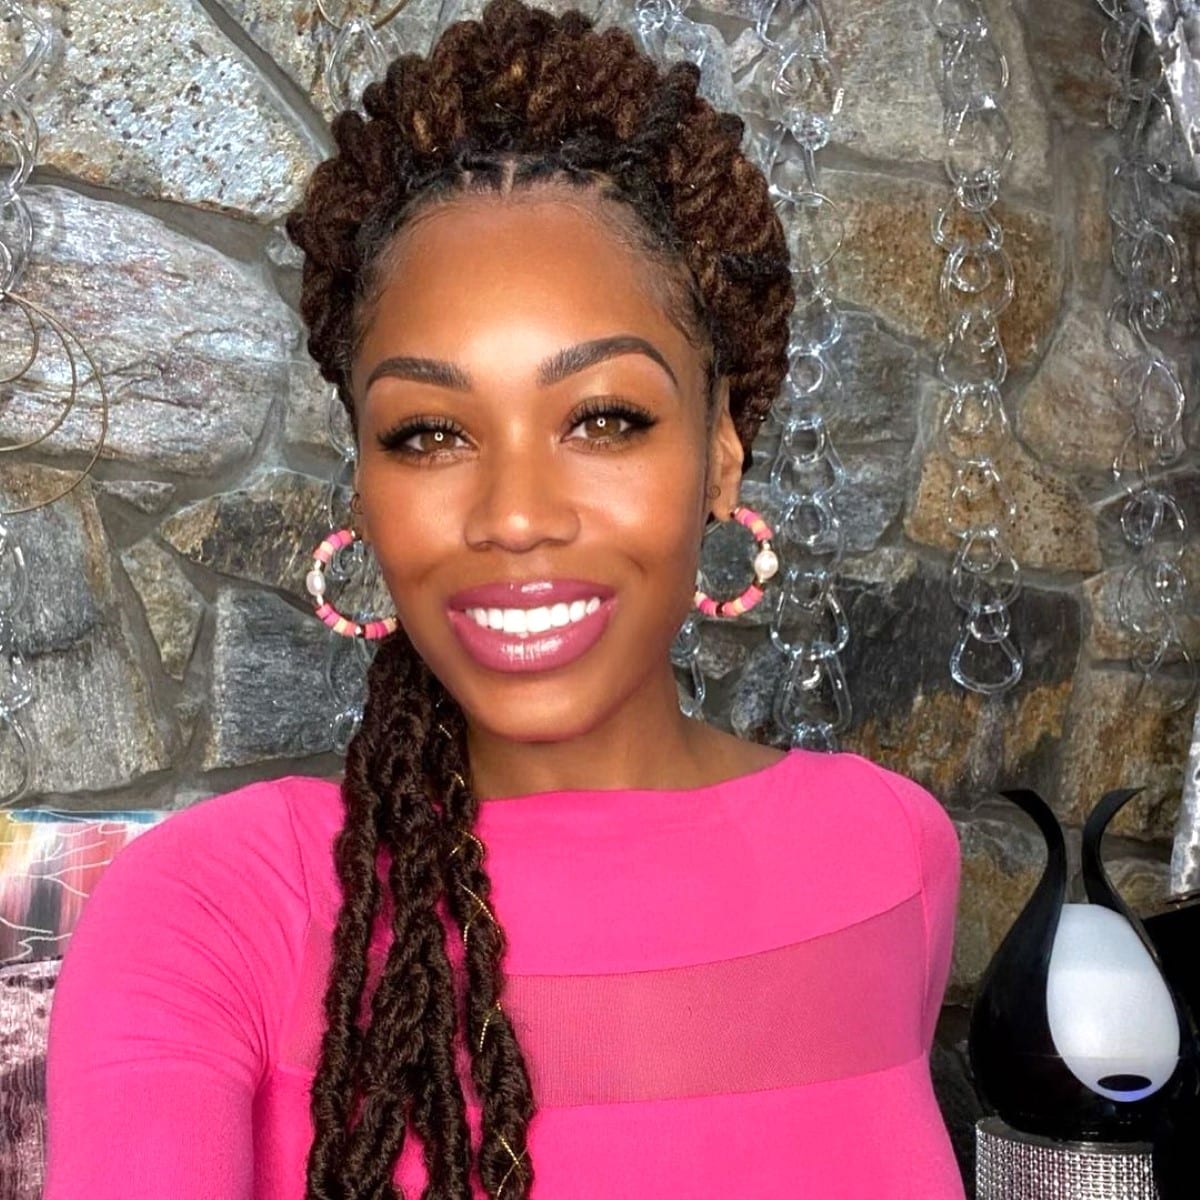 Former RHOP Star Monique Samuels Says 'Don't Ask' Regarding Possible Return to the Show